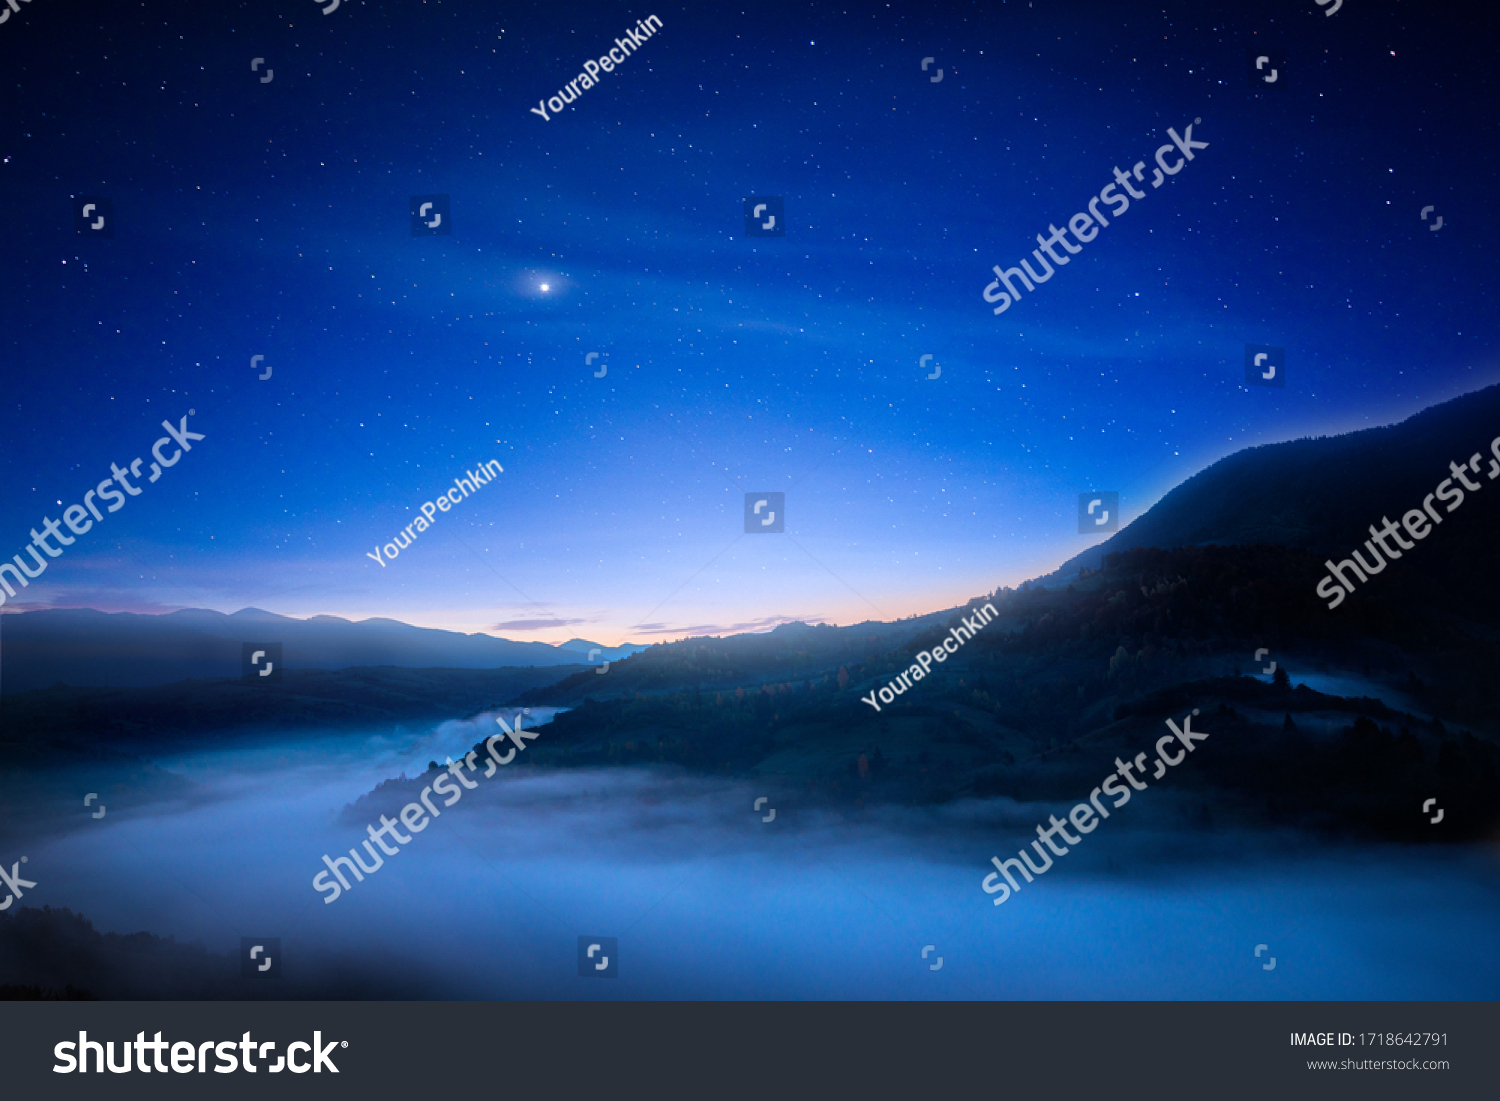 View of beautiful night sky with stars in foggy mountain valley. Scenic landscape of misty hills under blue starry sky. Concept of astrology and magical nighttime. #1718642791